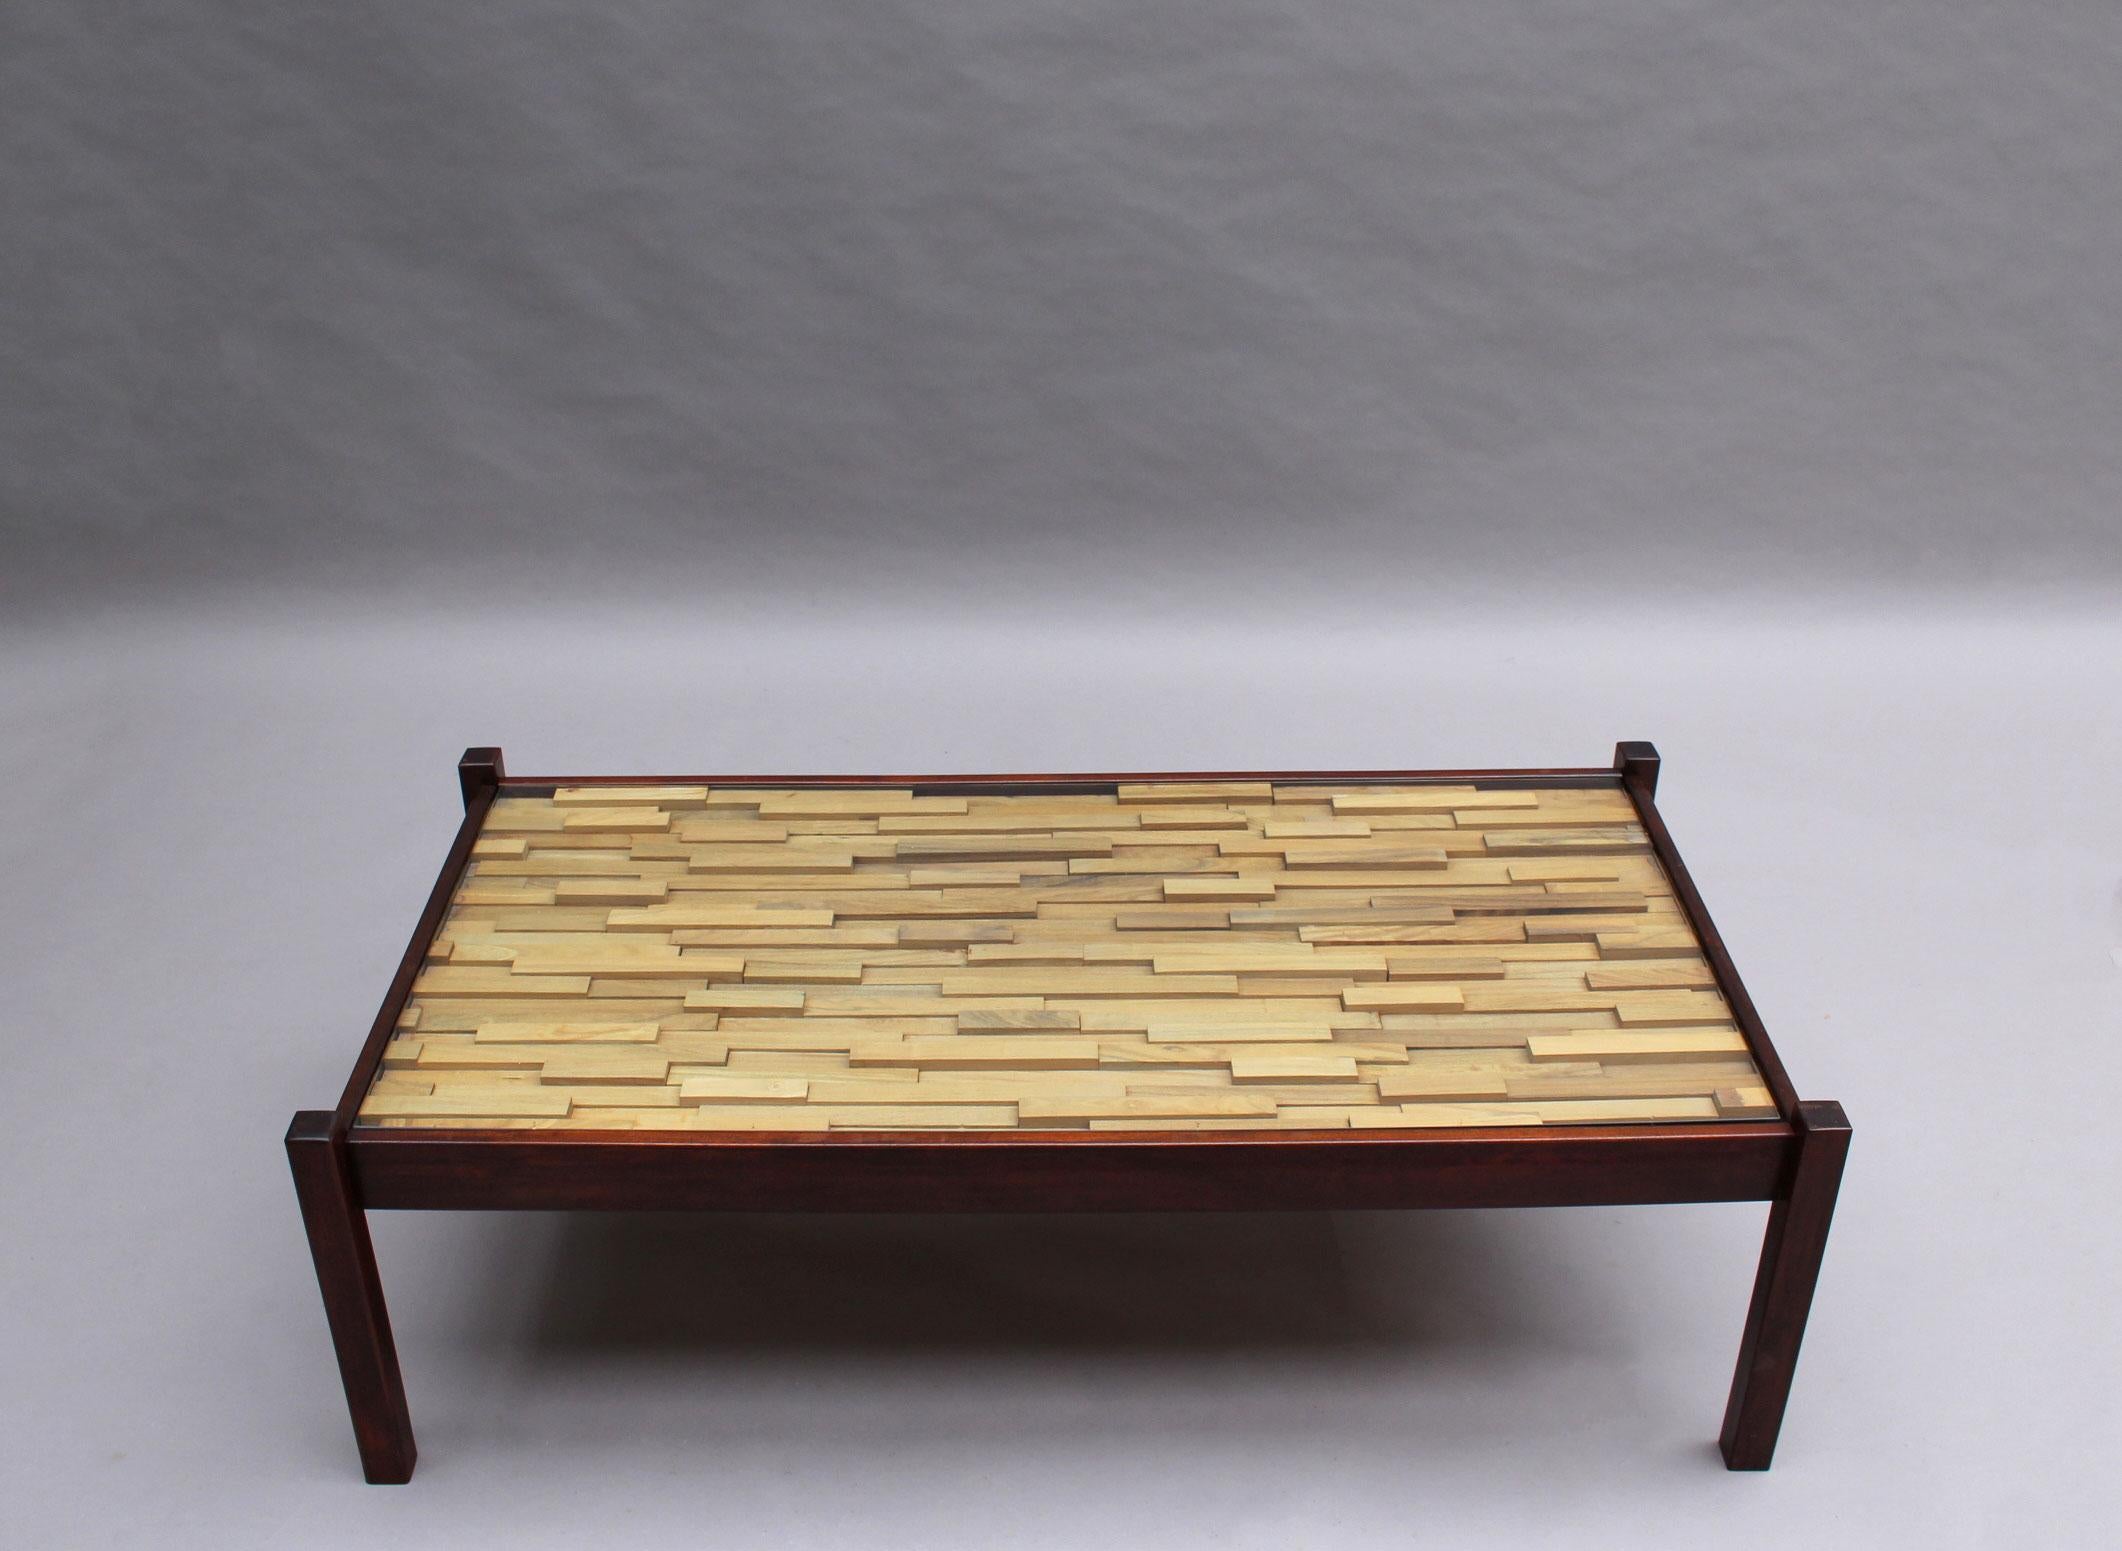 Sculptural 1960s Brazilian Coffee Table by Percival Lafer In Good Condition For Sale In Long Island City, NY